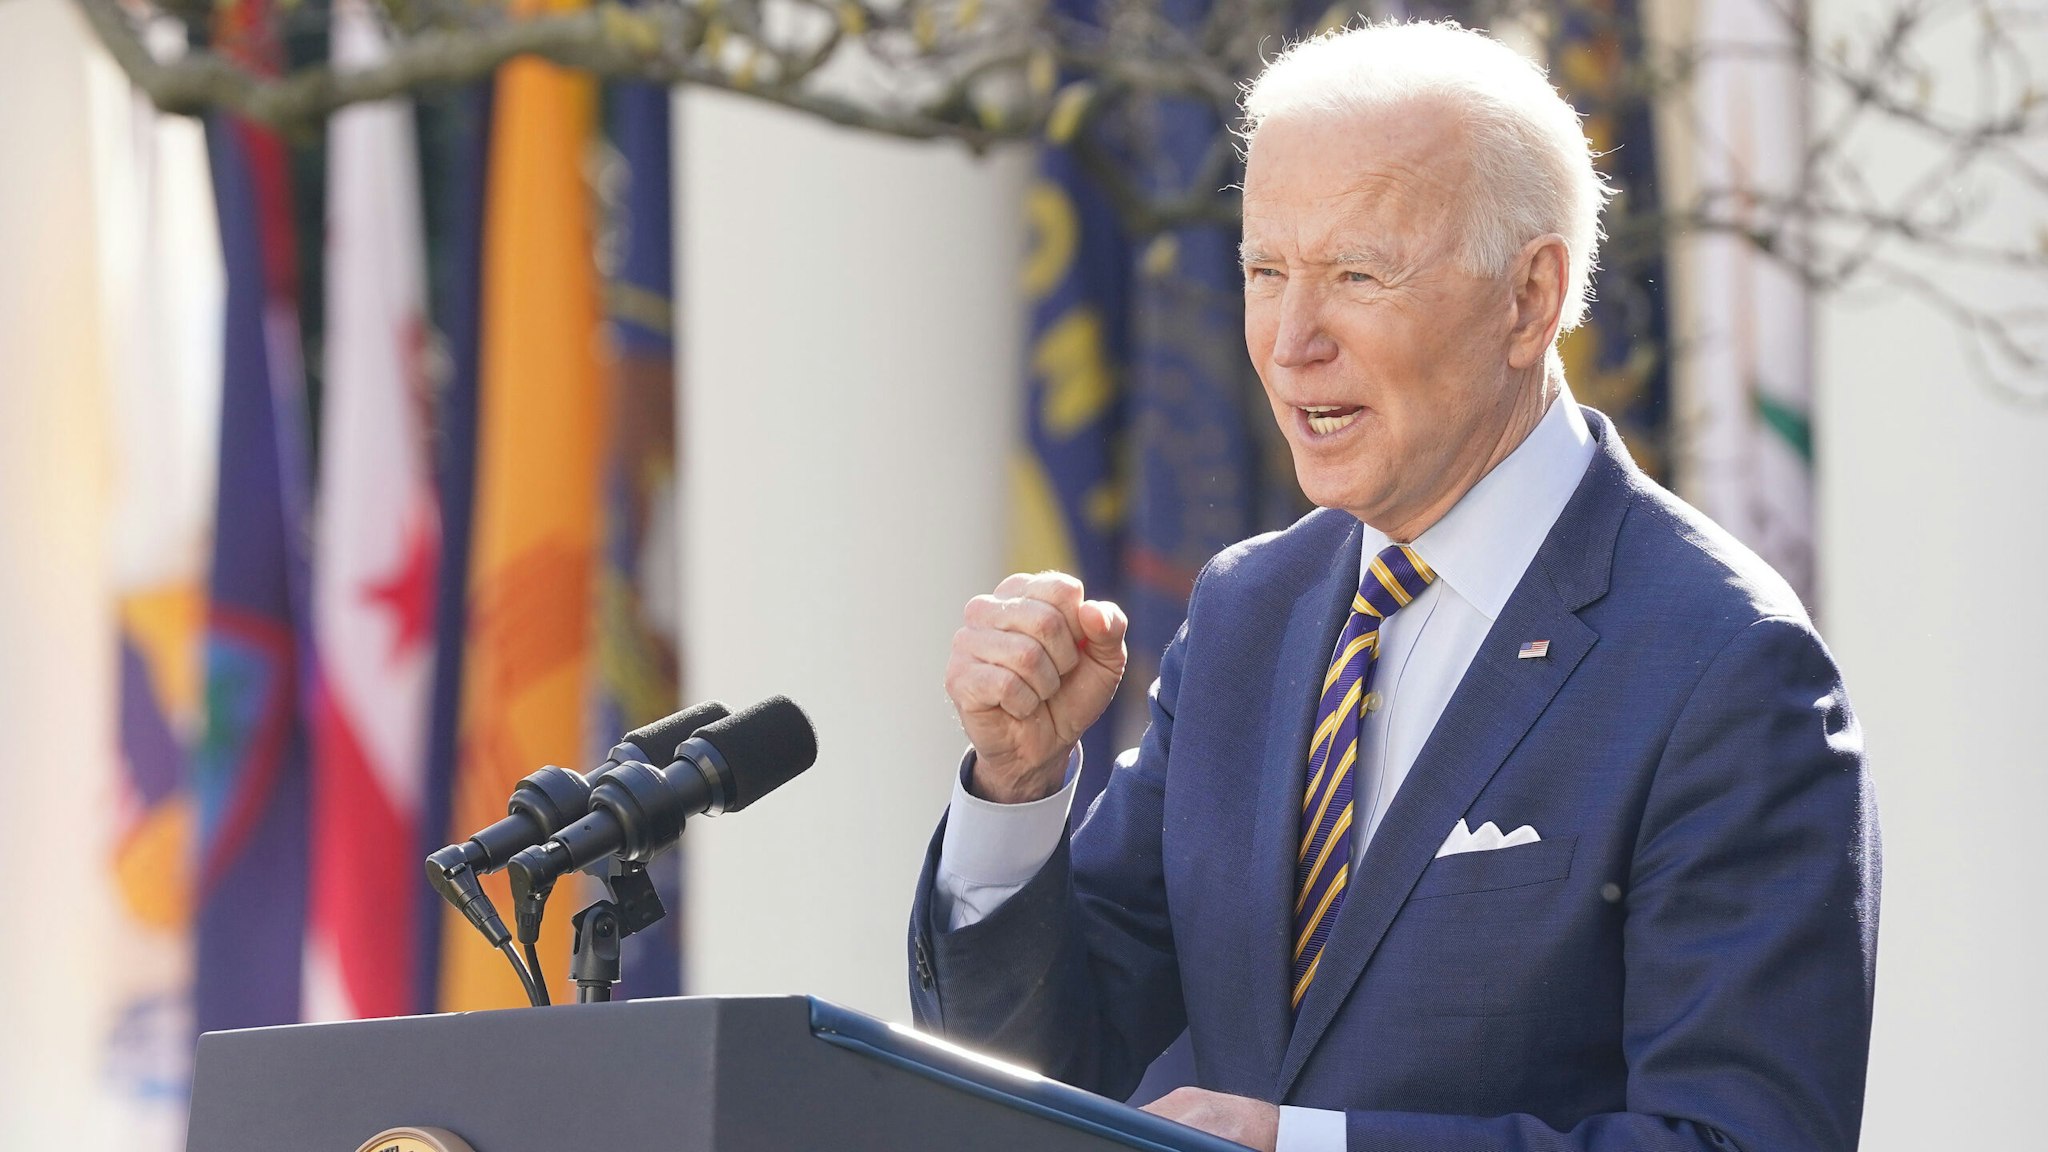 U.S. President Joe Biden speaks during an event in the Rose Garden of the White House in Washington, D.C., U.S., on Friday, March 12, 2021. Biden offered a Fourth of July goal for the U.S. to begin returning to normal as "light in the darkness" to a weary nation on Thursday, counting on a rapidly expanding supply of coronavirus vaccine to raise American hopes.